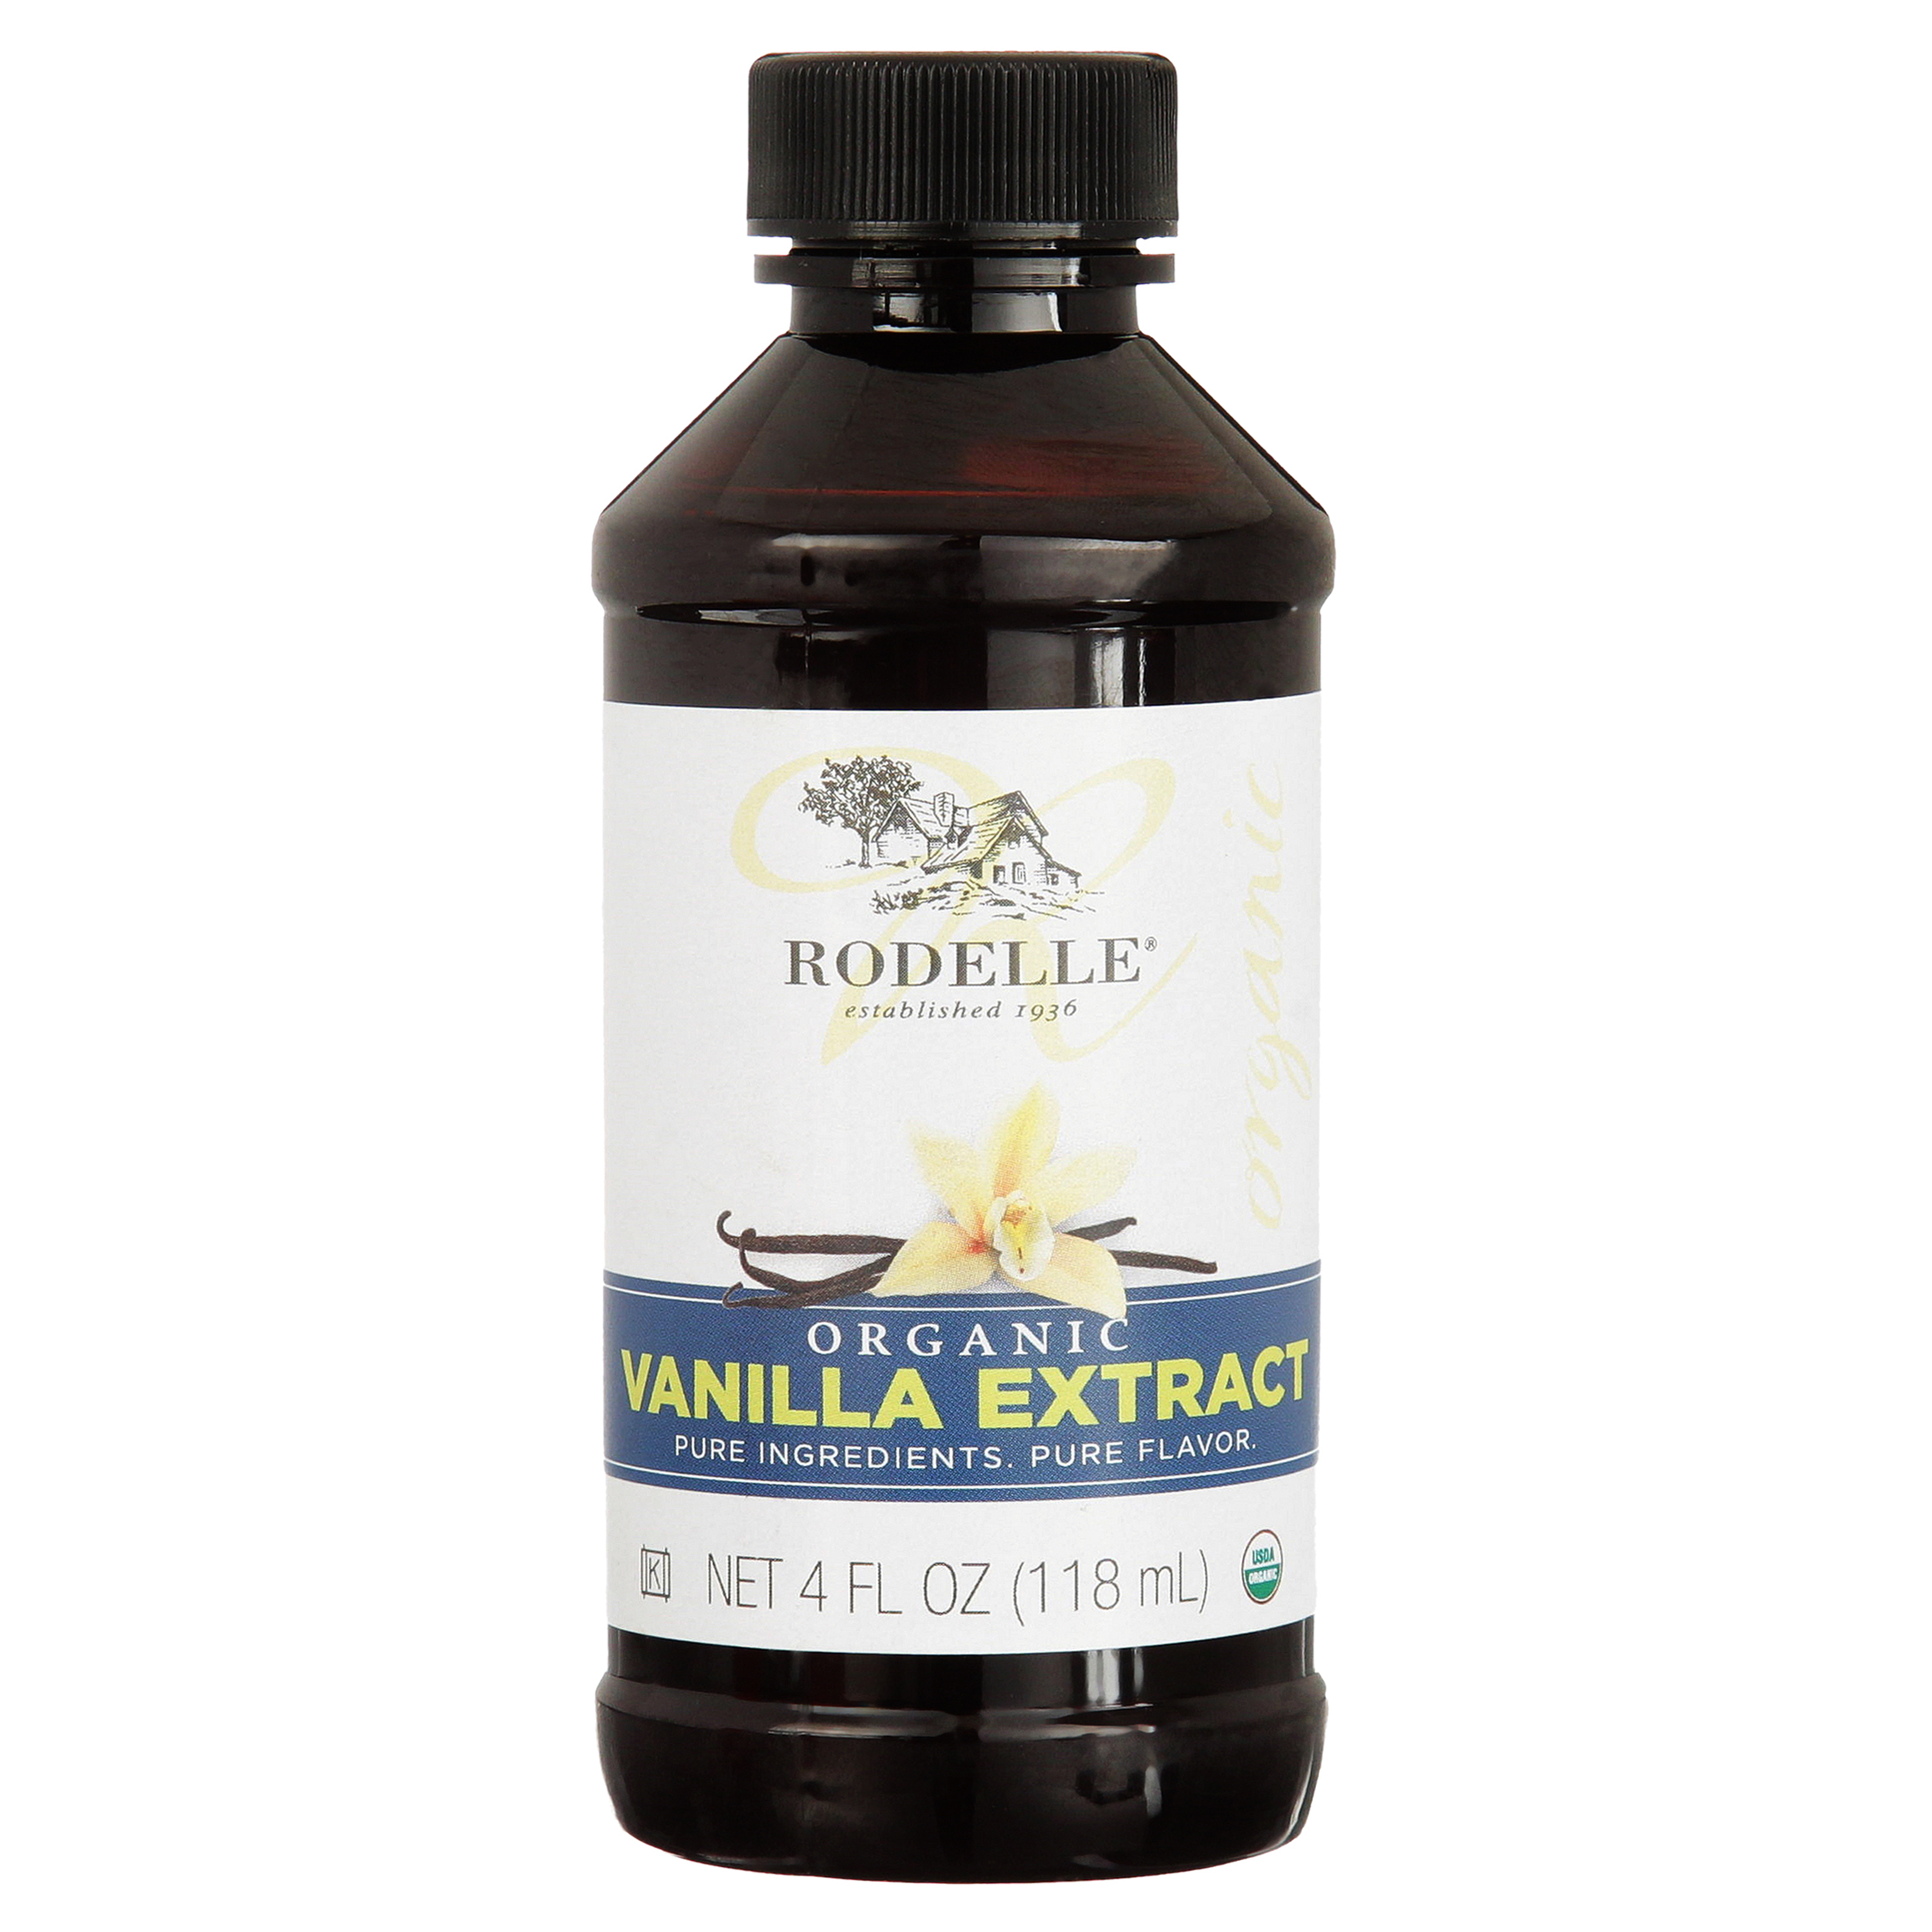 Rodelle Organic Pure Vanilla Extract 4 fl oz, Baking Extracts - image 2 of 6